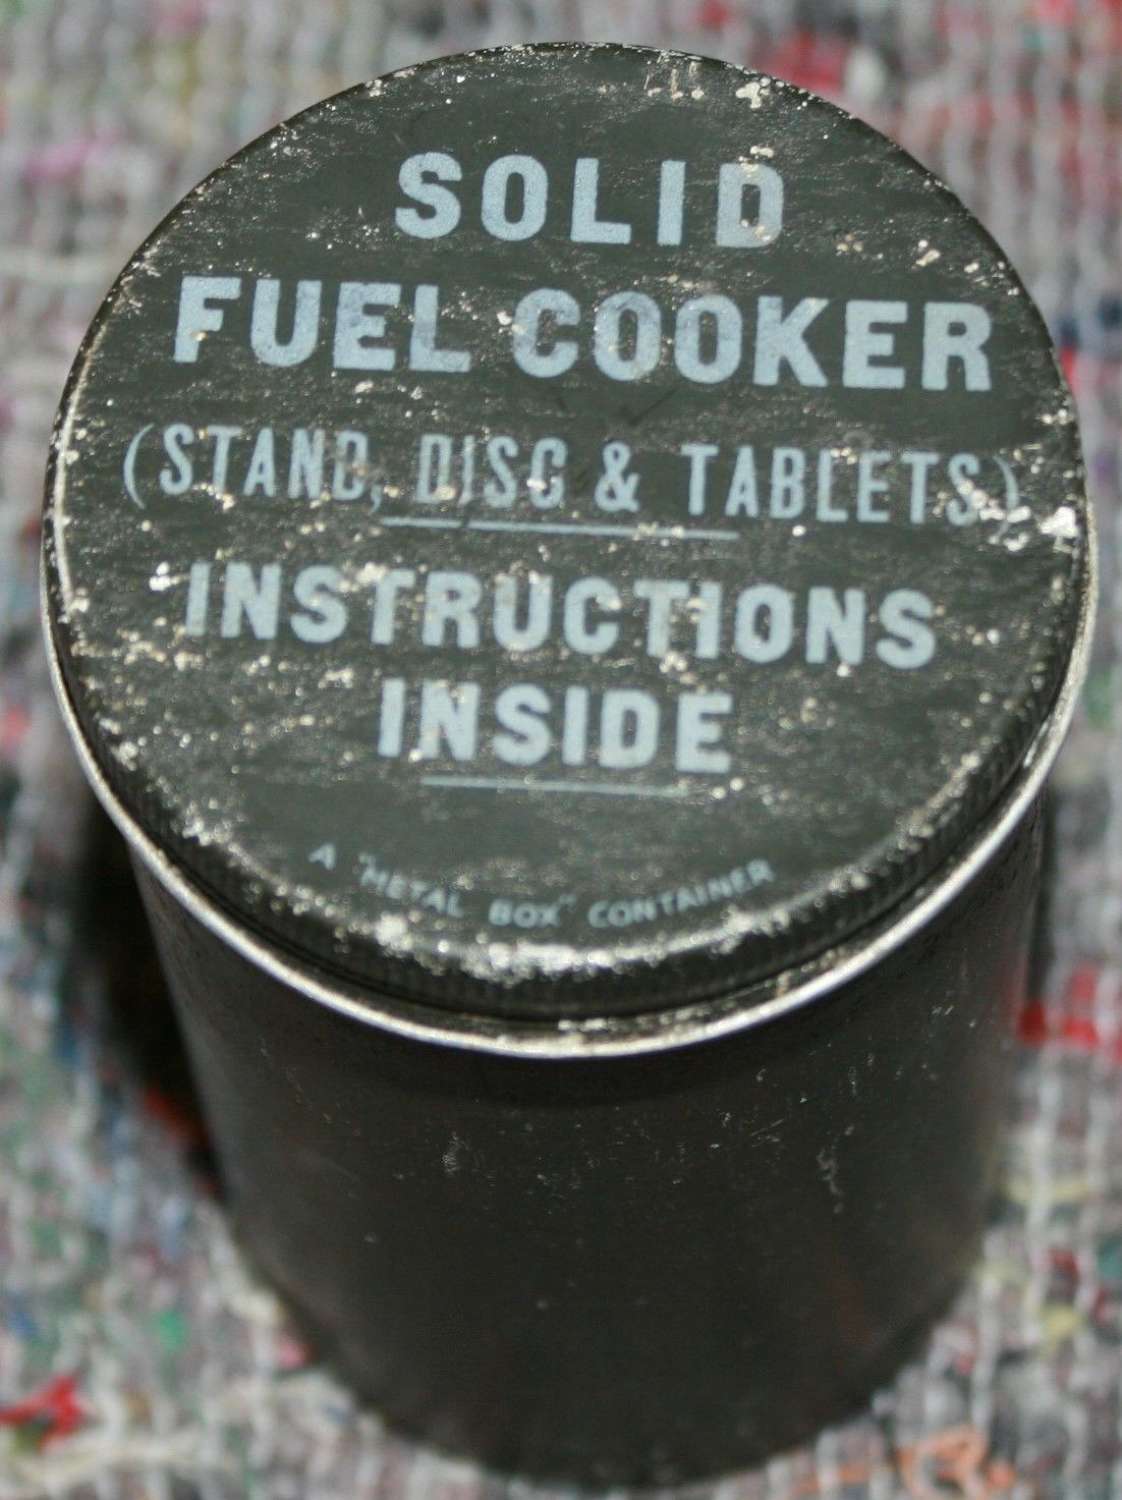 A SOLID FUEL COOKER TIN